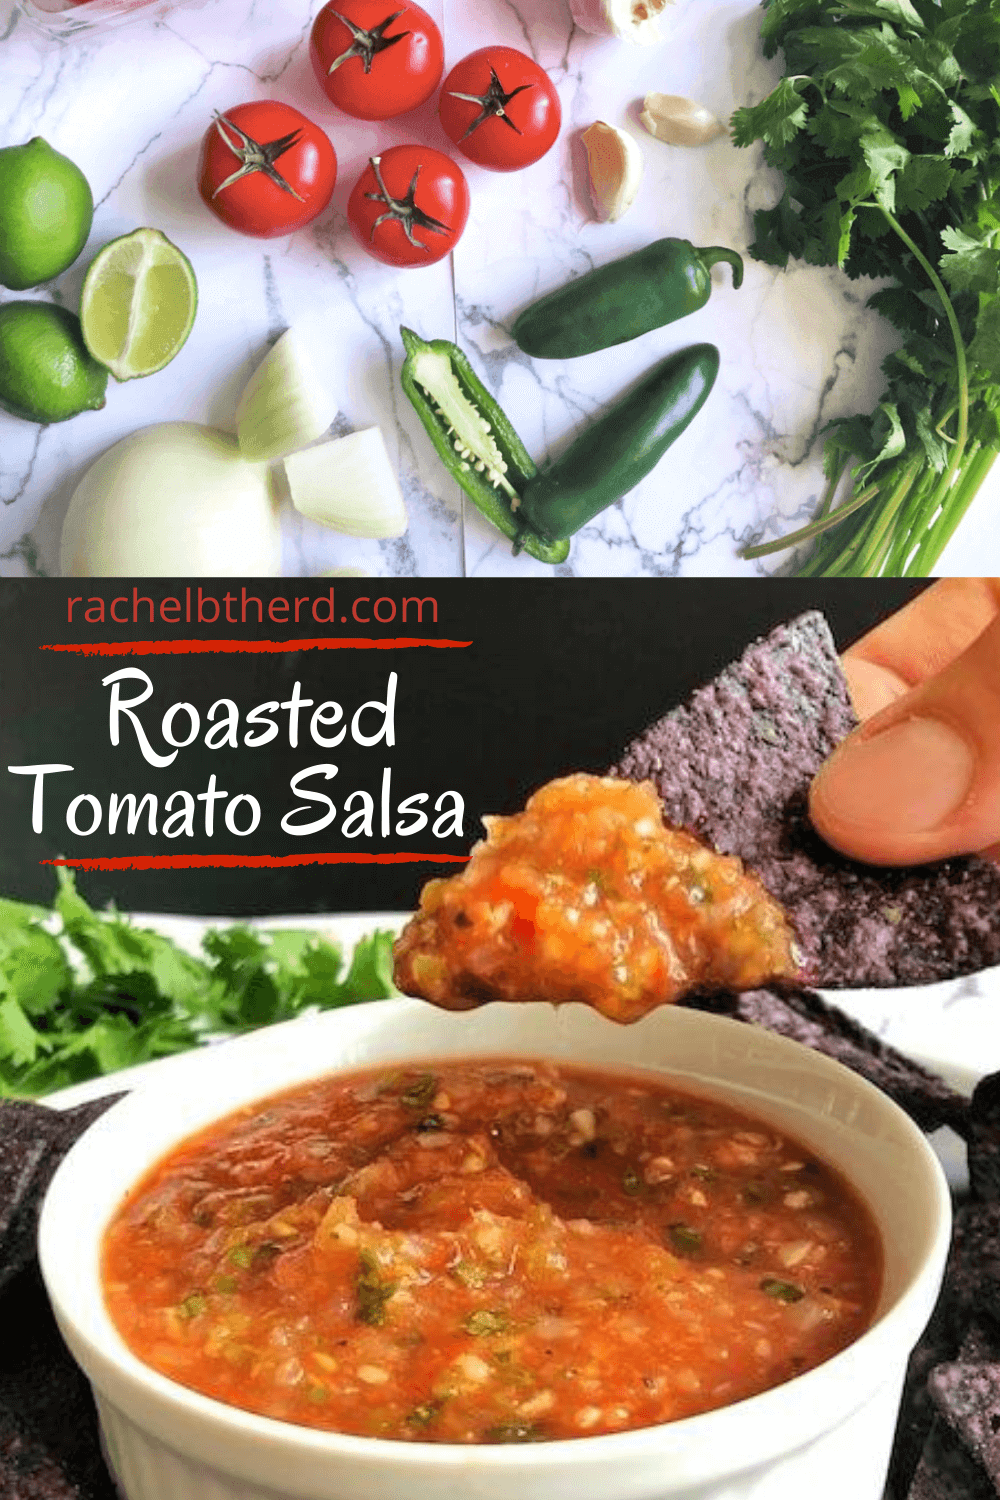 Roasted tomato salsa- ingredients and dipping a chip